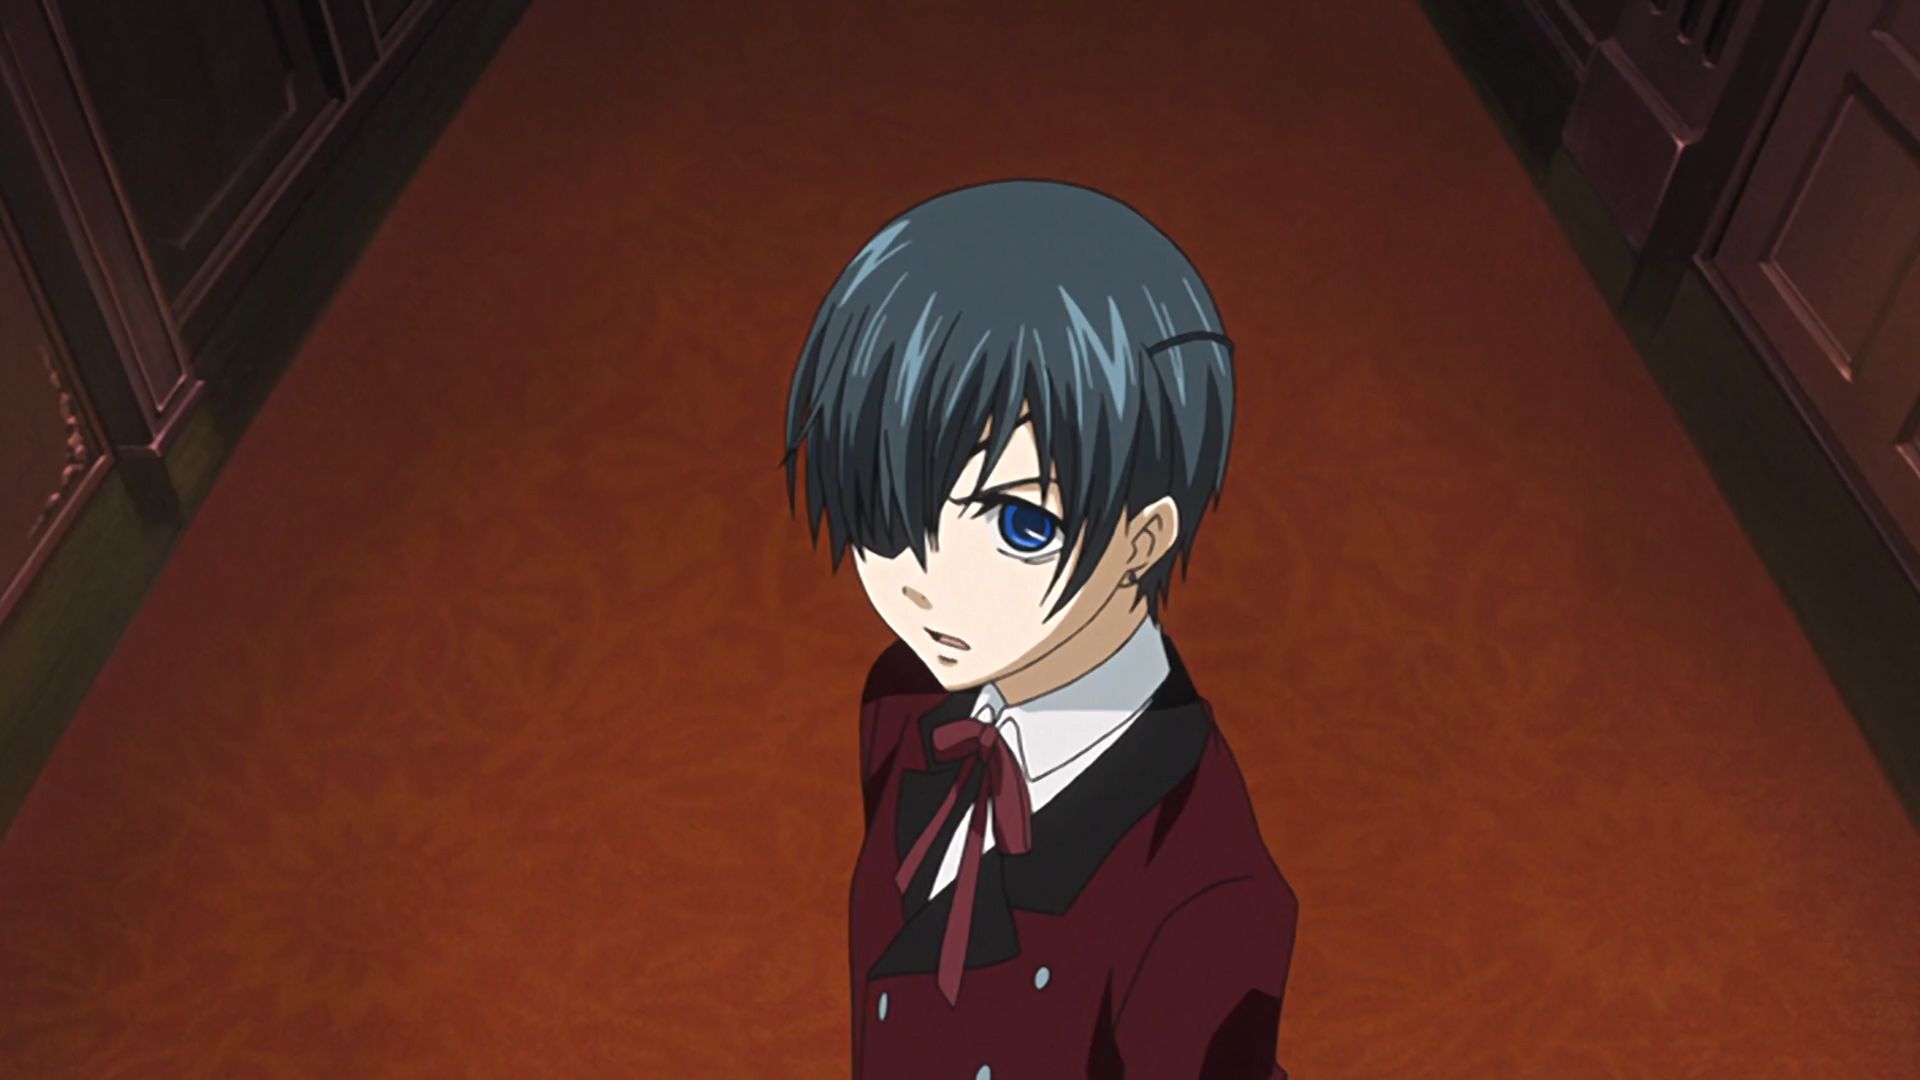 Ciel Phantomhive from Black Butler is one of the cute anime boys.